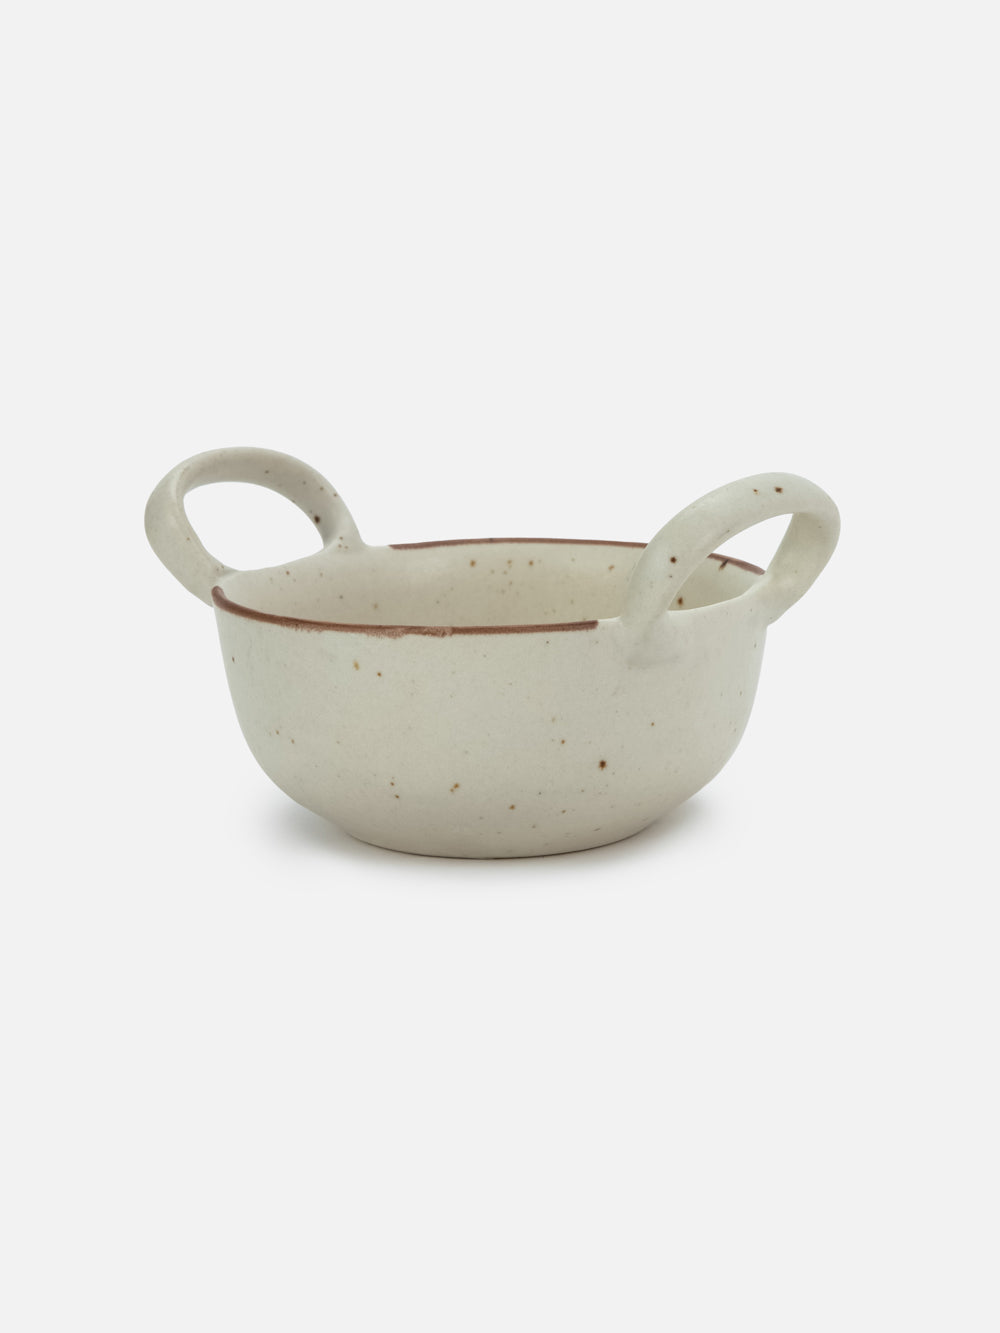 Country Ceramic Serving Bowl with Handles